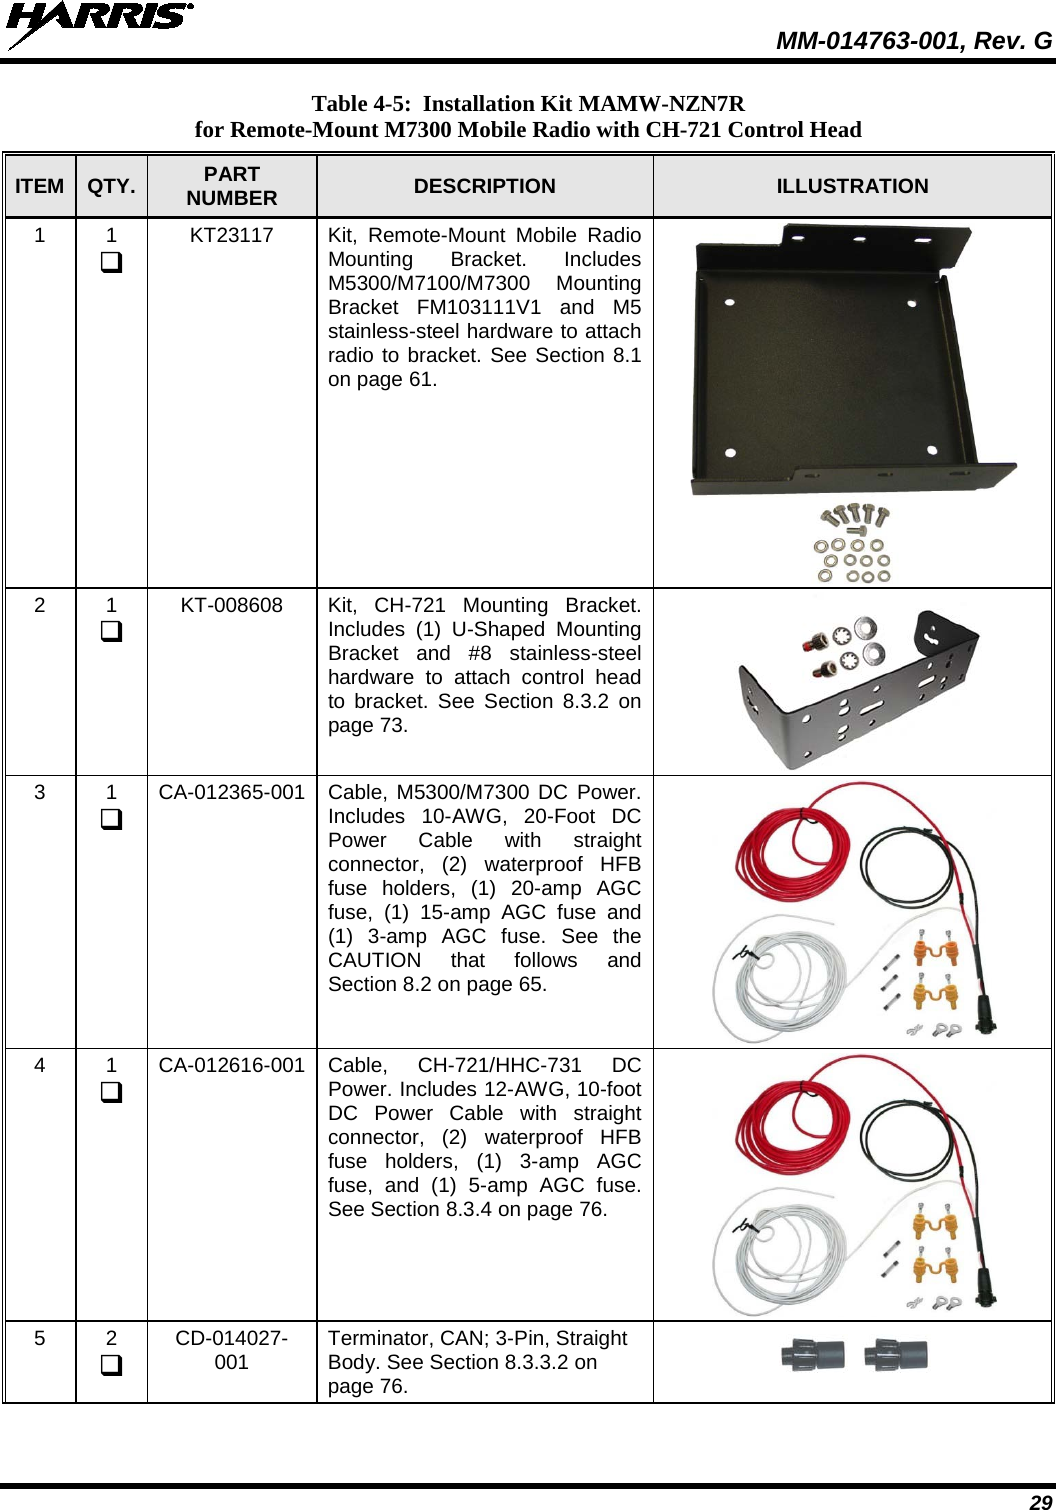  MM-014763-001, Rev. G 29 Table 4-5:  Installation Kit MAMW-NZN7R for Remote-Mount M7300 Mobile Radio with CH-721 Control Head ITEM QTY. PART NUMBER DESCRIPTION ILLUSTRATION 1  1  KT23117 Kit, Remote-Mount Mobile Radio Mounting Bracket. Includes M5300/M7100/M7300 Mounting Bracket FM103111V1 and M5 stainless-steel hardware to attach radio to bracket. See Section 8.1 on page 61.  2  1  KT-008608 Kit, CH-721 Mounting Bracket. Includes (1) U-Shaped Mounting Bracket and #8 stainless-steel hardware to attach control head to bracket. See Section 8.3.2 on page 73.  3  1  CA-012365-001 Cable, M5300/M7300 DC Power. Includes 10-AWG, 20-Foot DC Power Cable with straight connector, (2) waterproof HFB fuse holders, (1)  20-amp AGC fuse,  (1) 15-amp AGC fuse and (1) 3-amp AGC fuse. See  the CAUTION that follows and Section 8.2 on page 65.  4  1  CA-012616-001 Cable, CH-721/HHC-731 DC Power. Includes 12-AWG, 10-foot DC Power Cable with straight connector, (2) waterproof HFB fuse holders, (1) 3-amp AGC fuse, and (1) 5-amp AGC fuse. See Section 8.3.4 on page 76.  5  2  CD-014027-001 Terminator, CAN; 3-Pin, Straight Body. See Section 8.3.3.2 on page 76.       